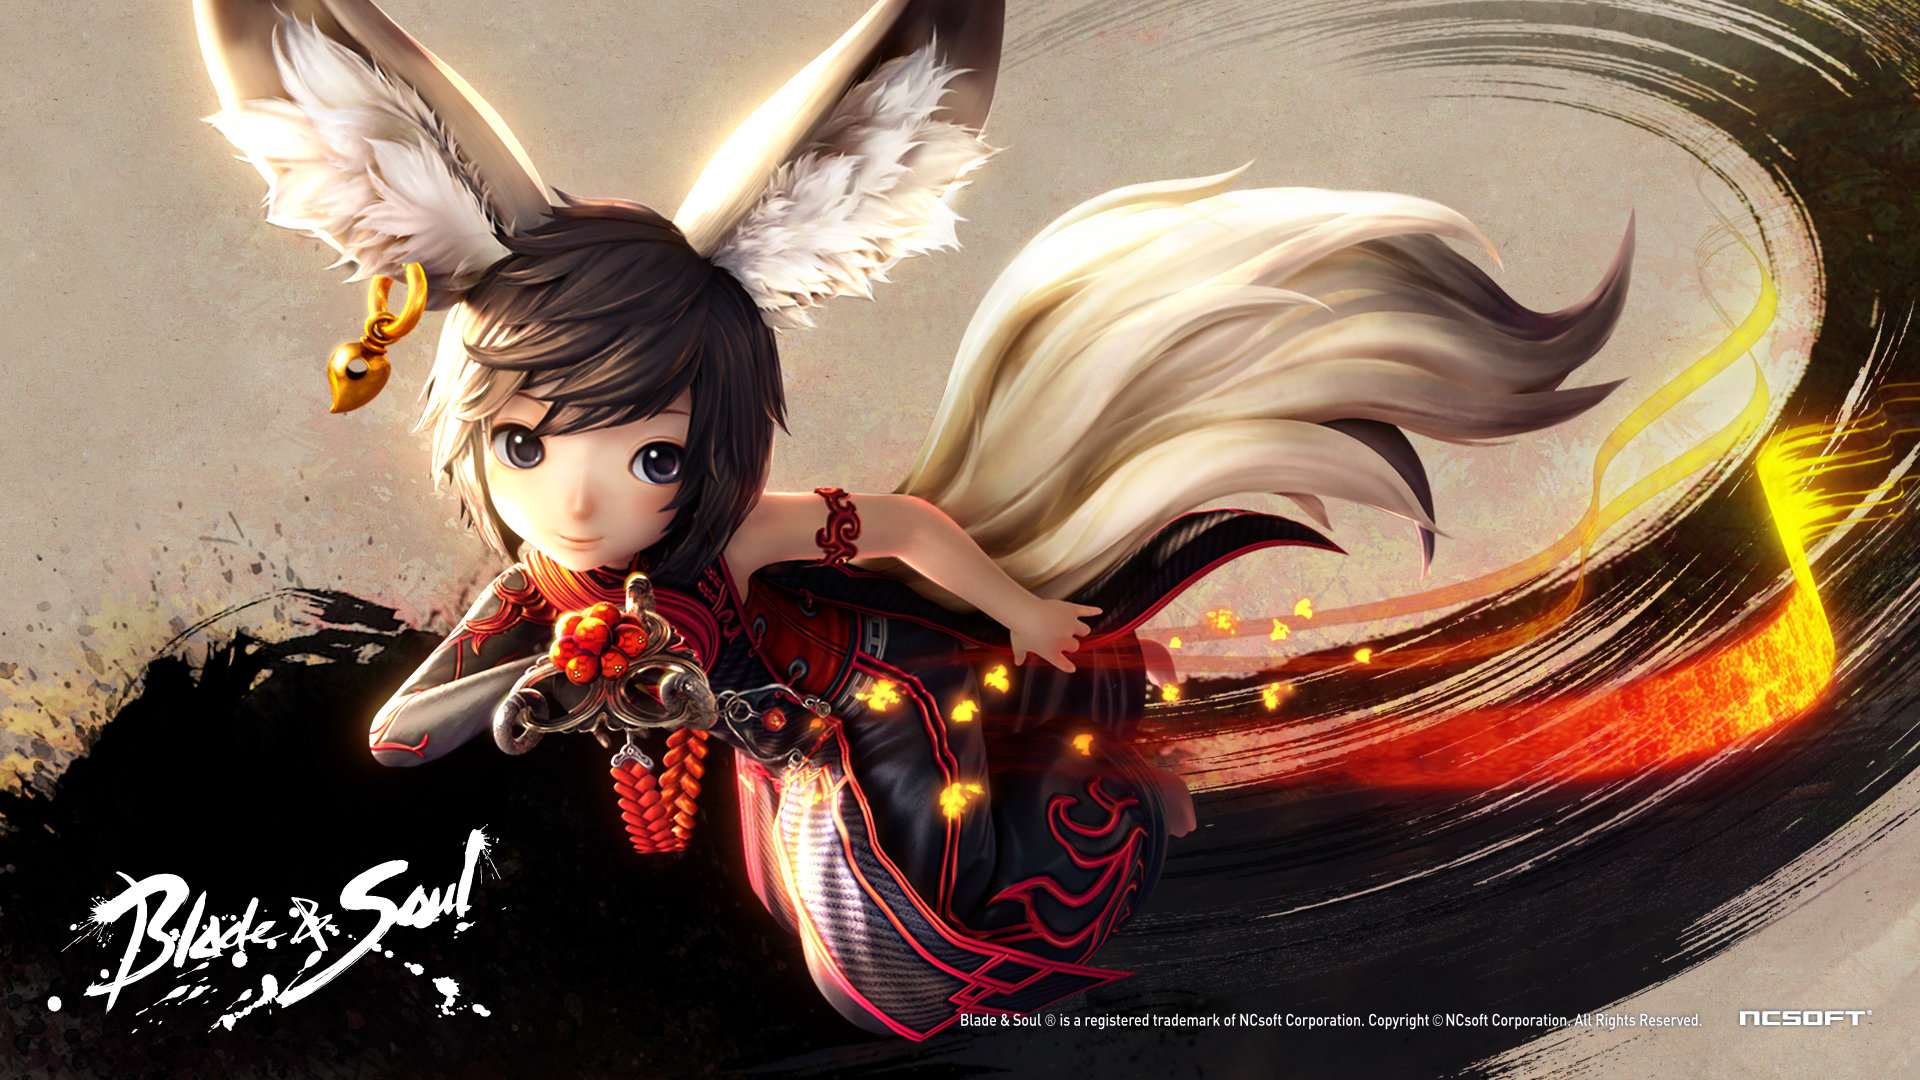 Blade And Soul Wallpapers 1920x1080 Full Hd 1080p Desktop Backgrounds